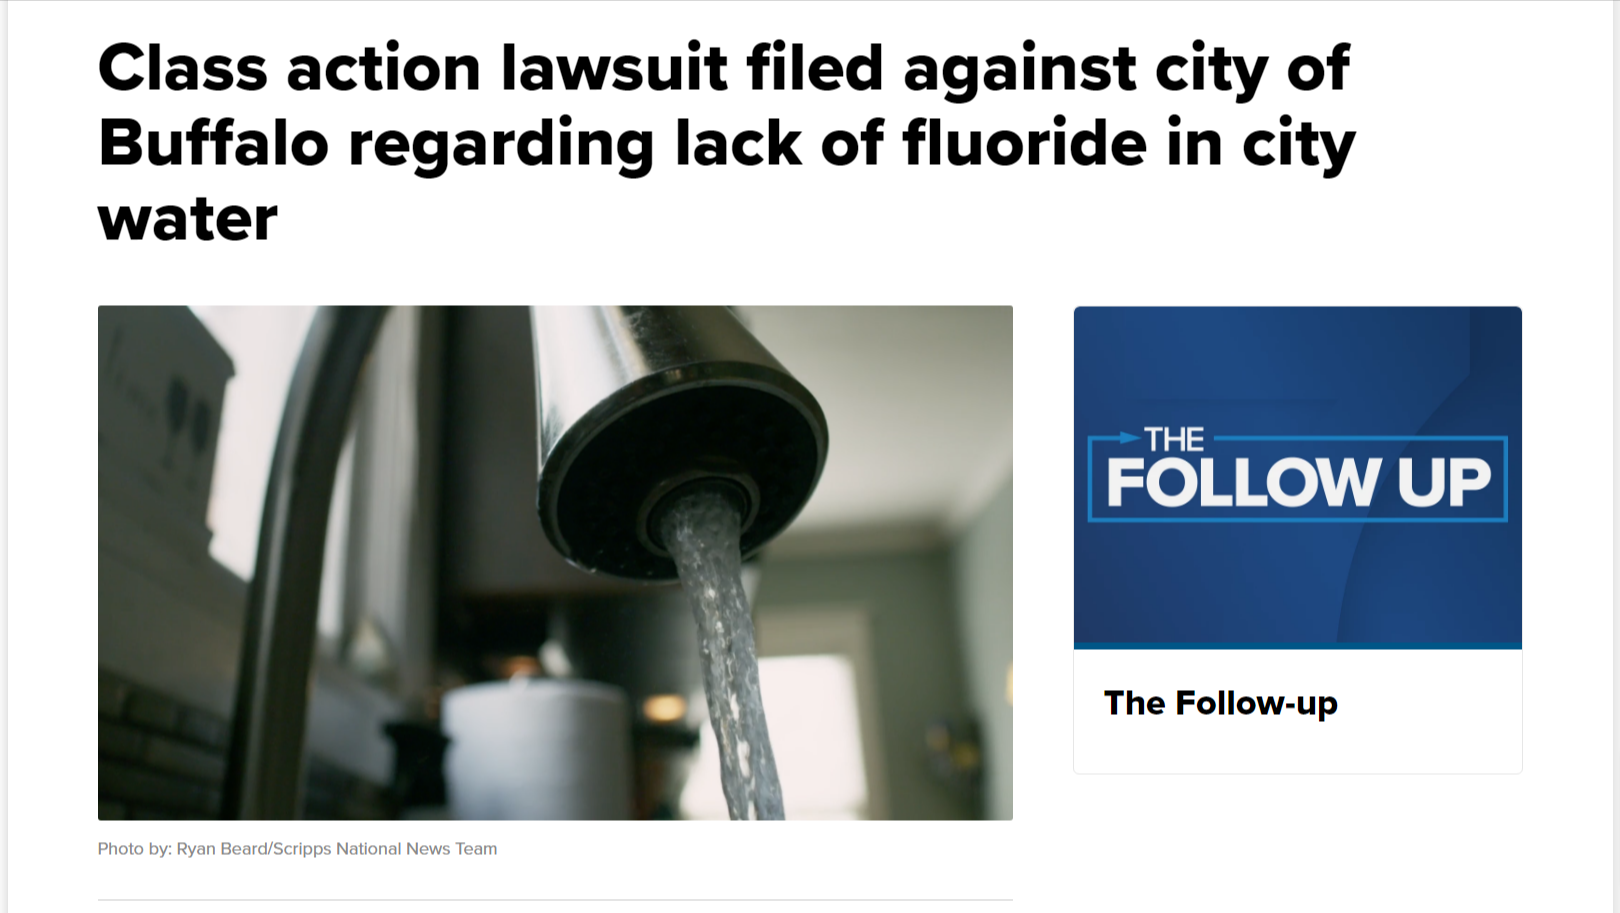 Buffalonians Take Action: “Class action lawsuit filed against city of Buffalo regarding lack of fluoride in city water”